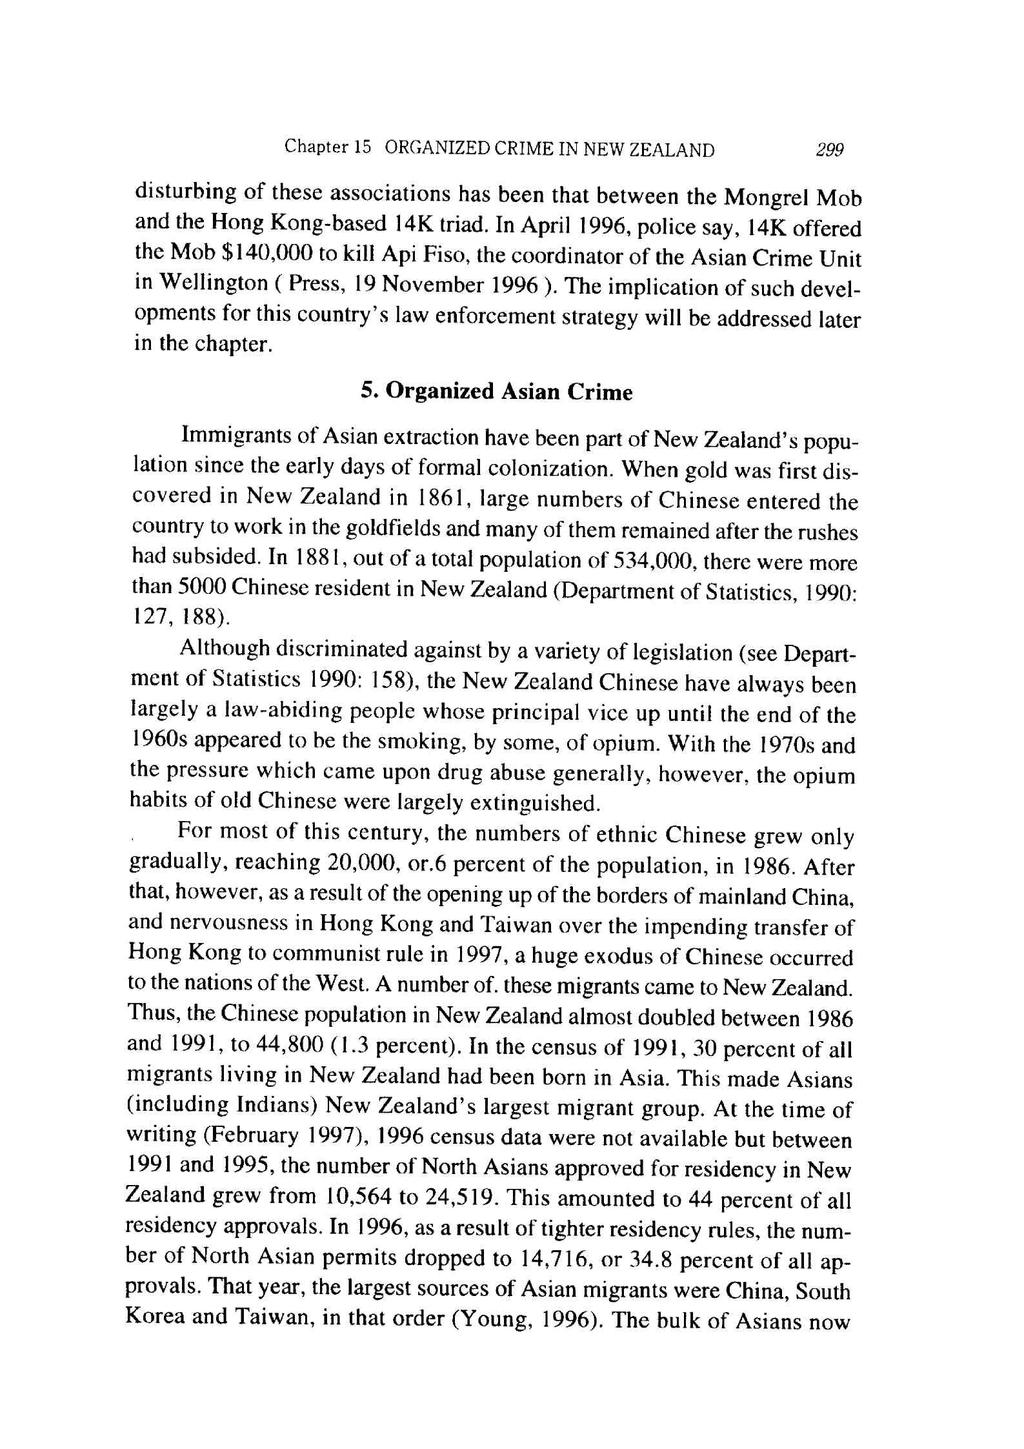 Chapter 15 ORGANIZED CRIME IN NEW ZEALAND299 disturbing of these associations has been that between the Mongrel Mob and the Hong Kong-based 14K triad.